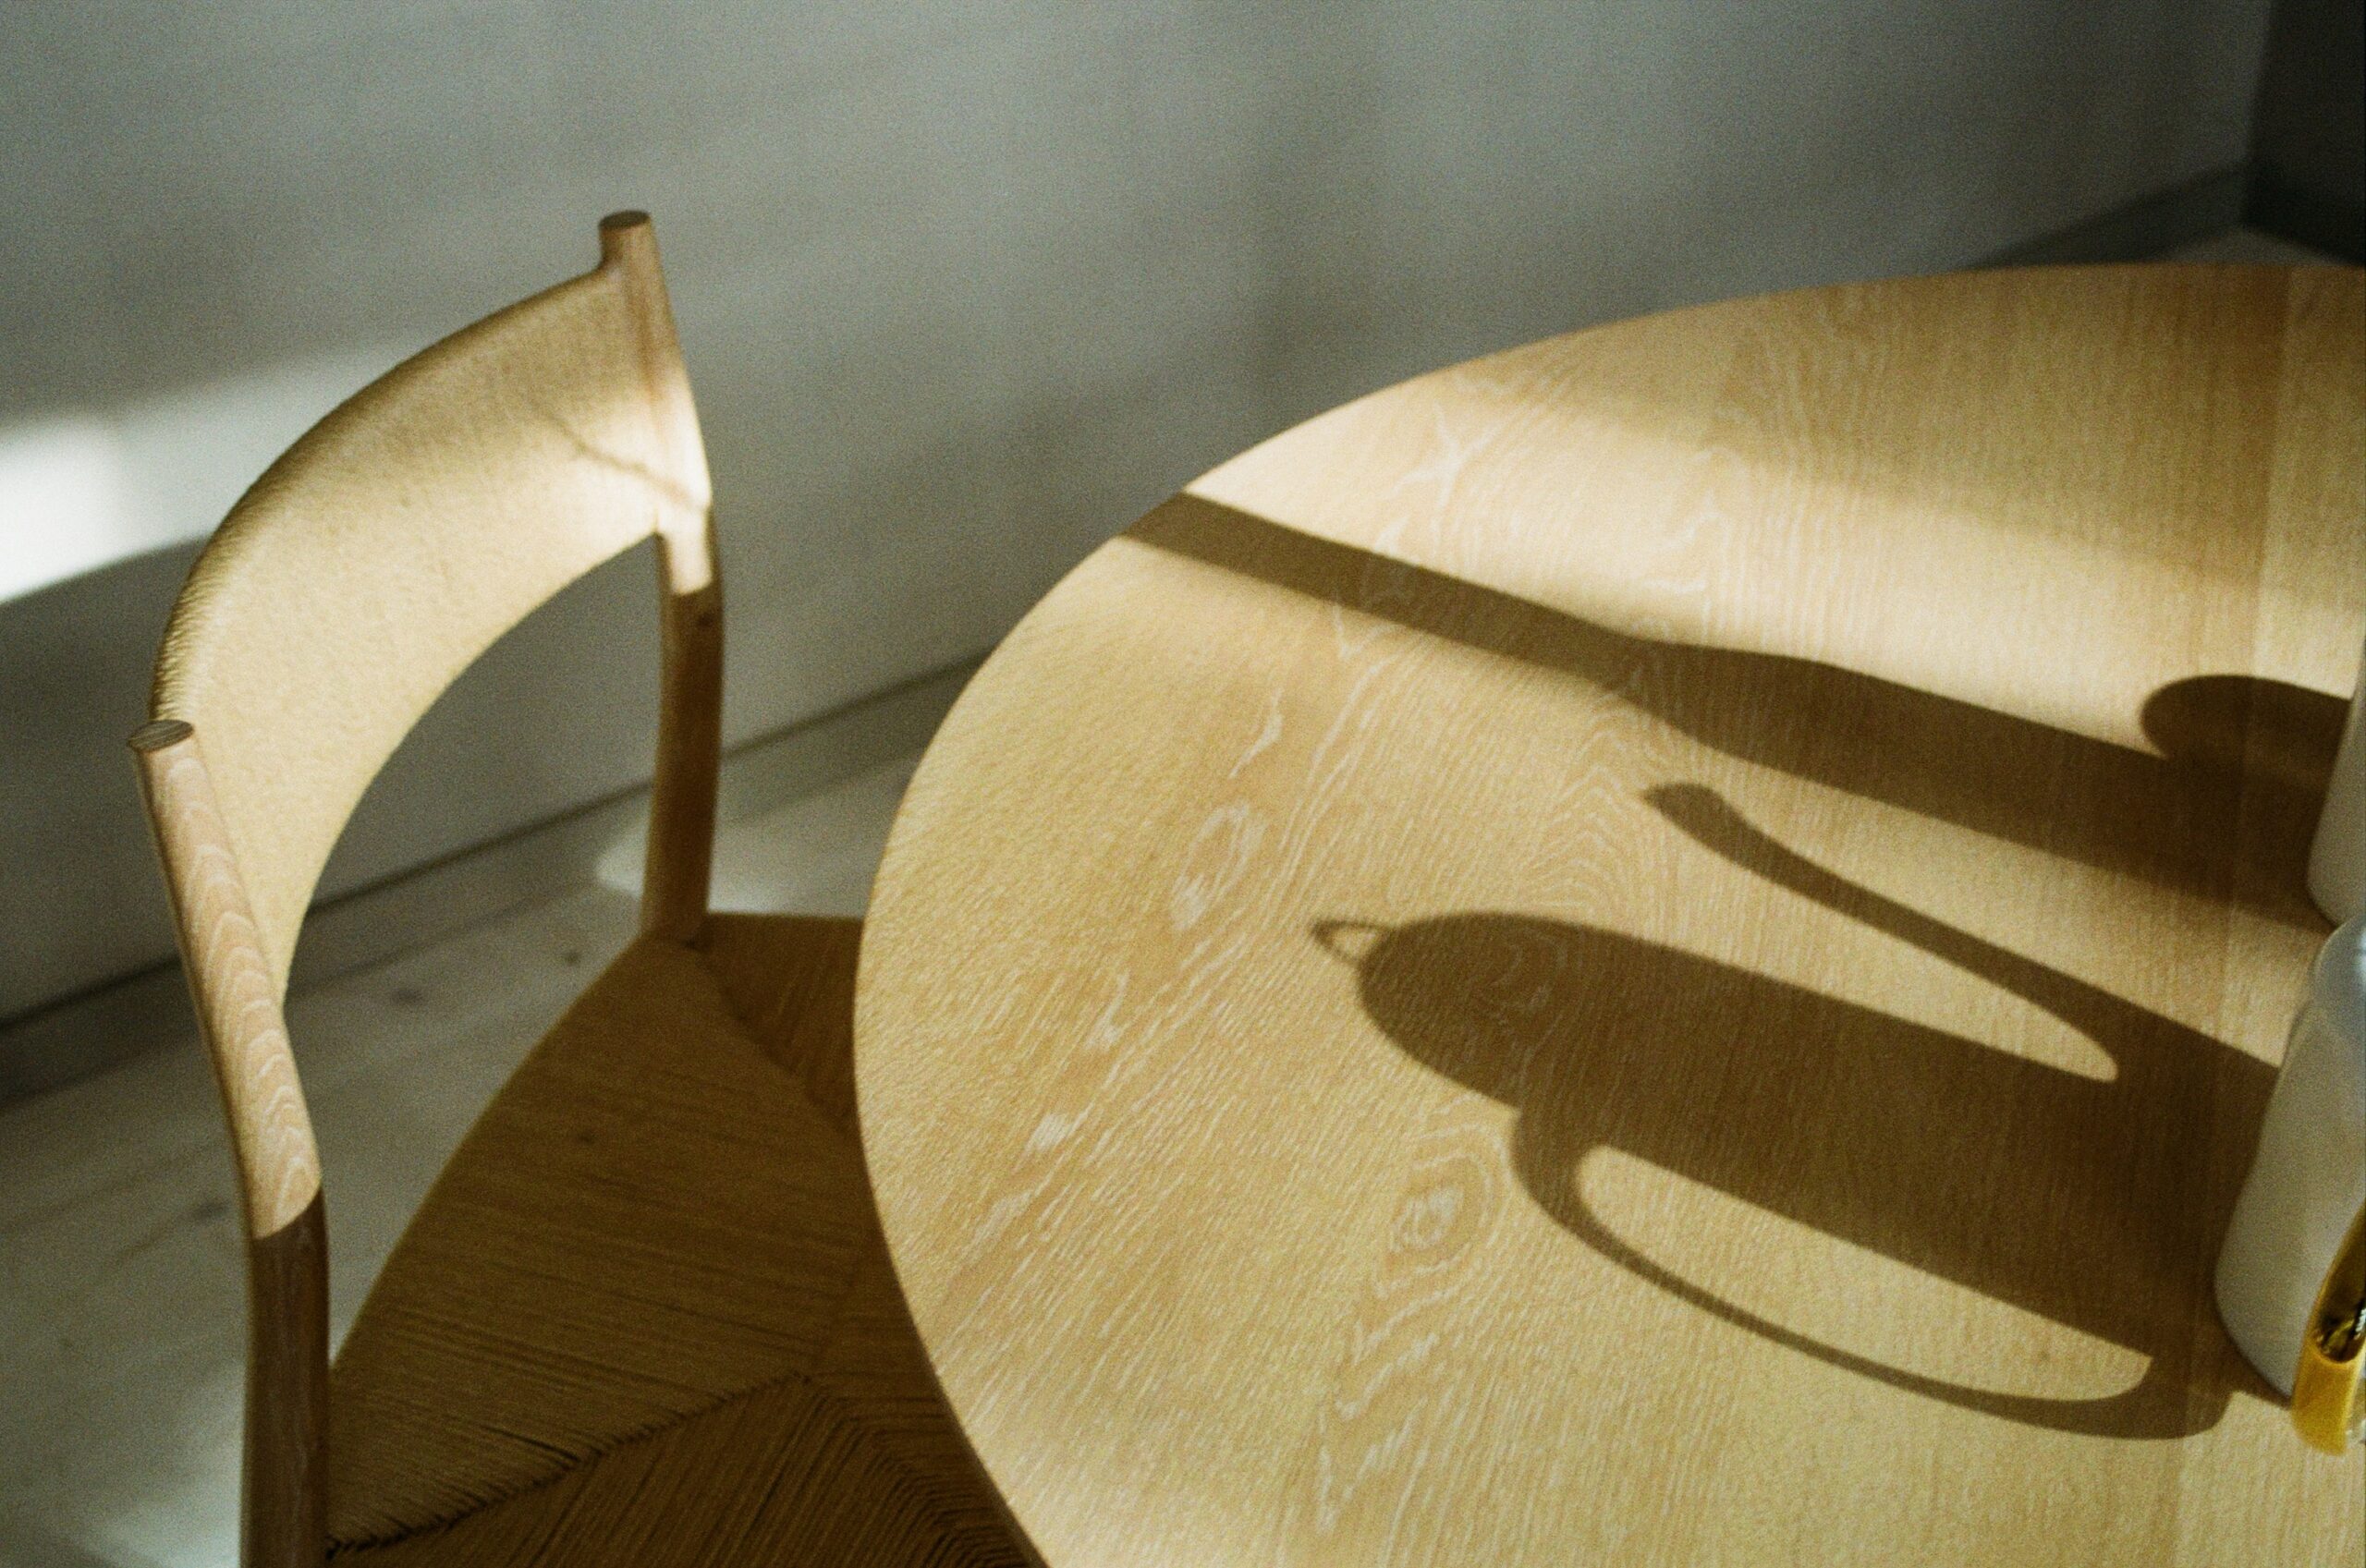 Wooden chair at a wooden table